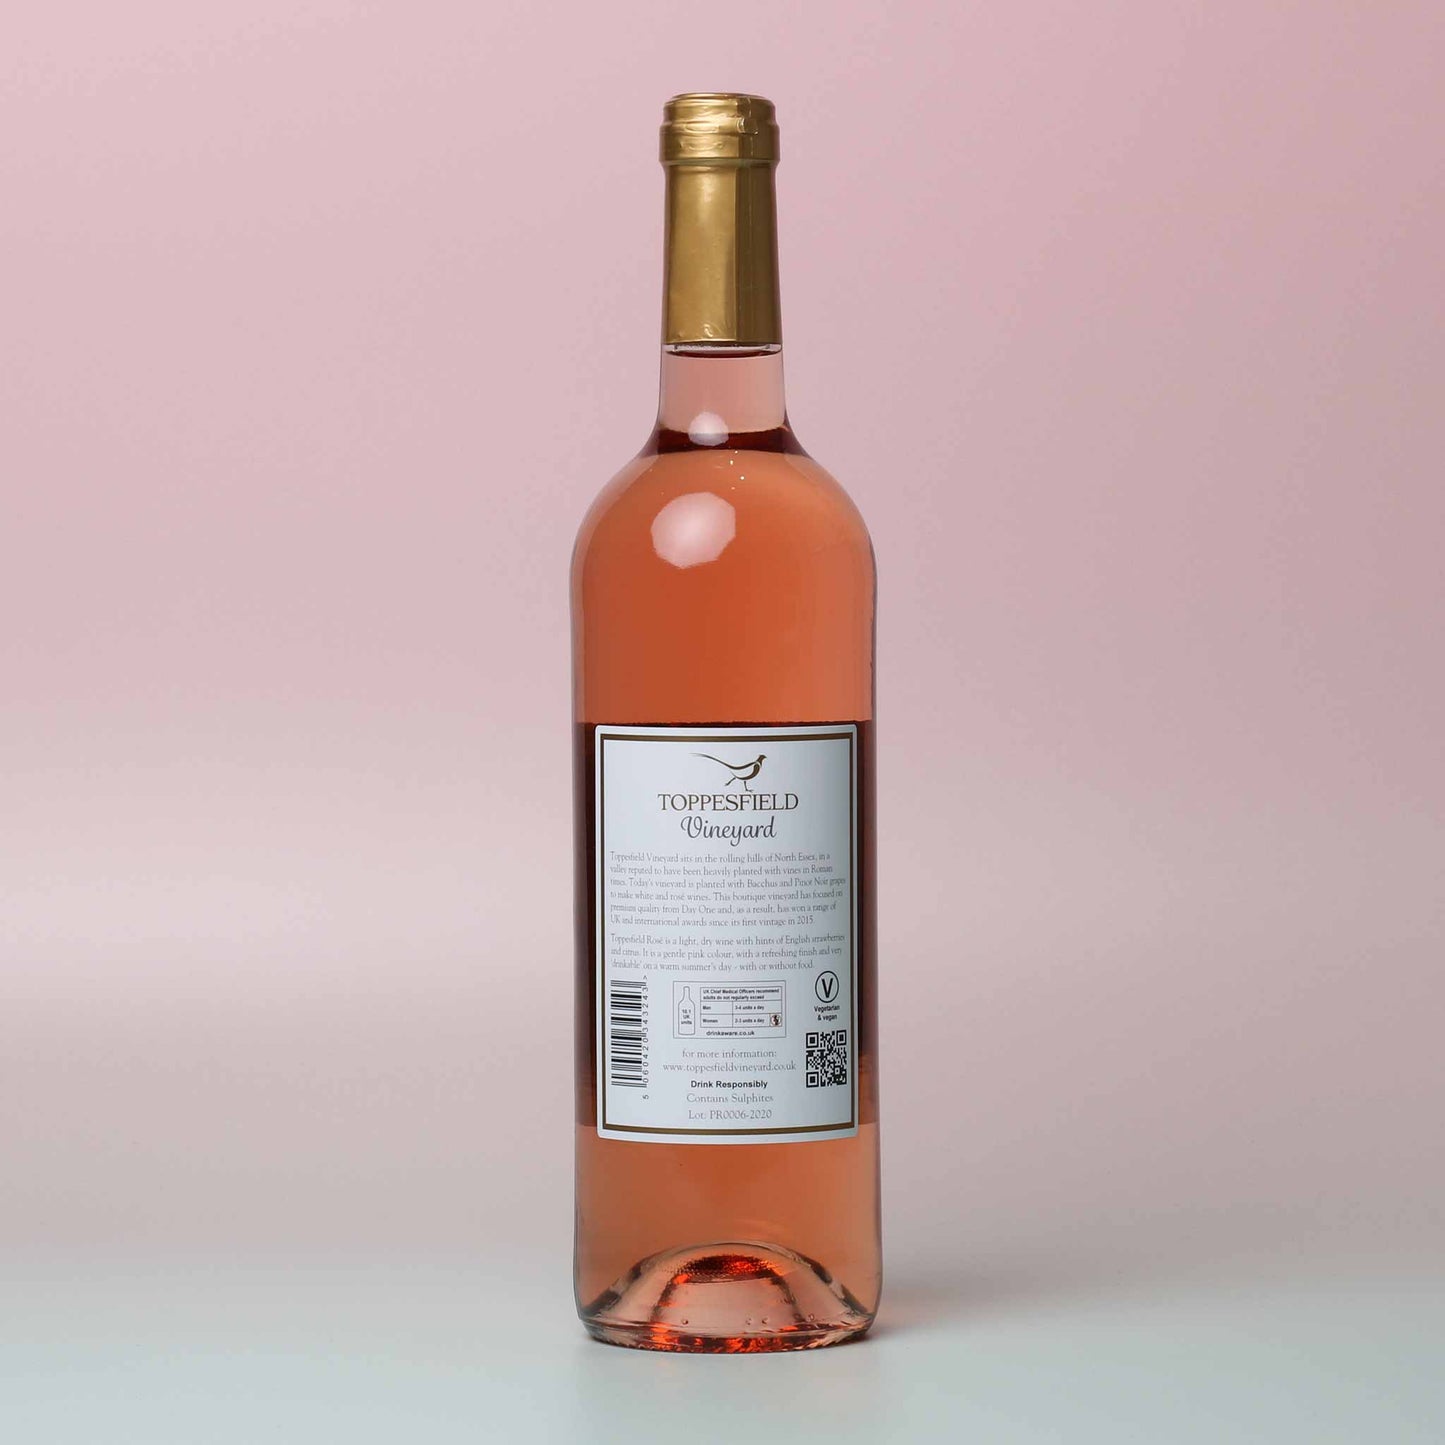 Toppesfield Pinot Rosé is a dry, Provençal style rosé with hints of English strawberries and citrus